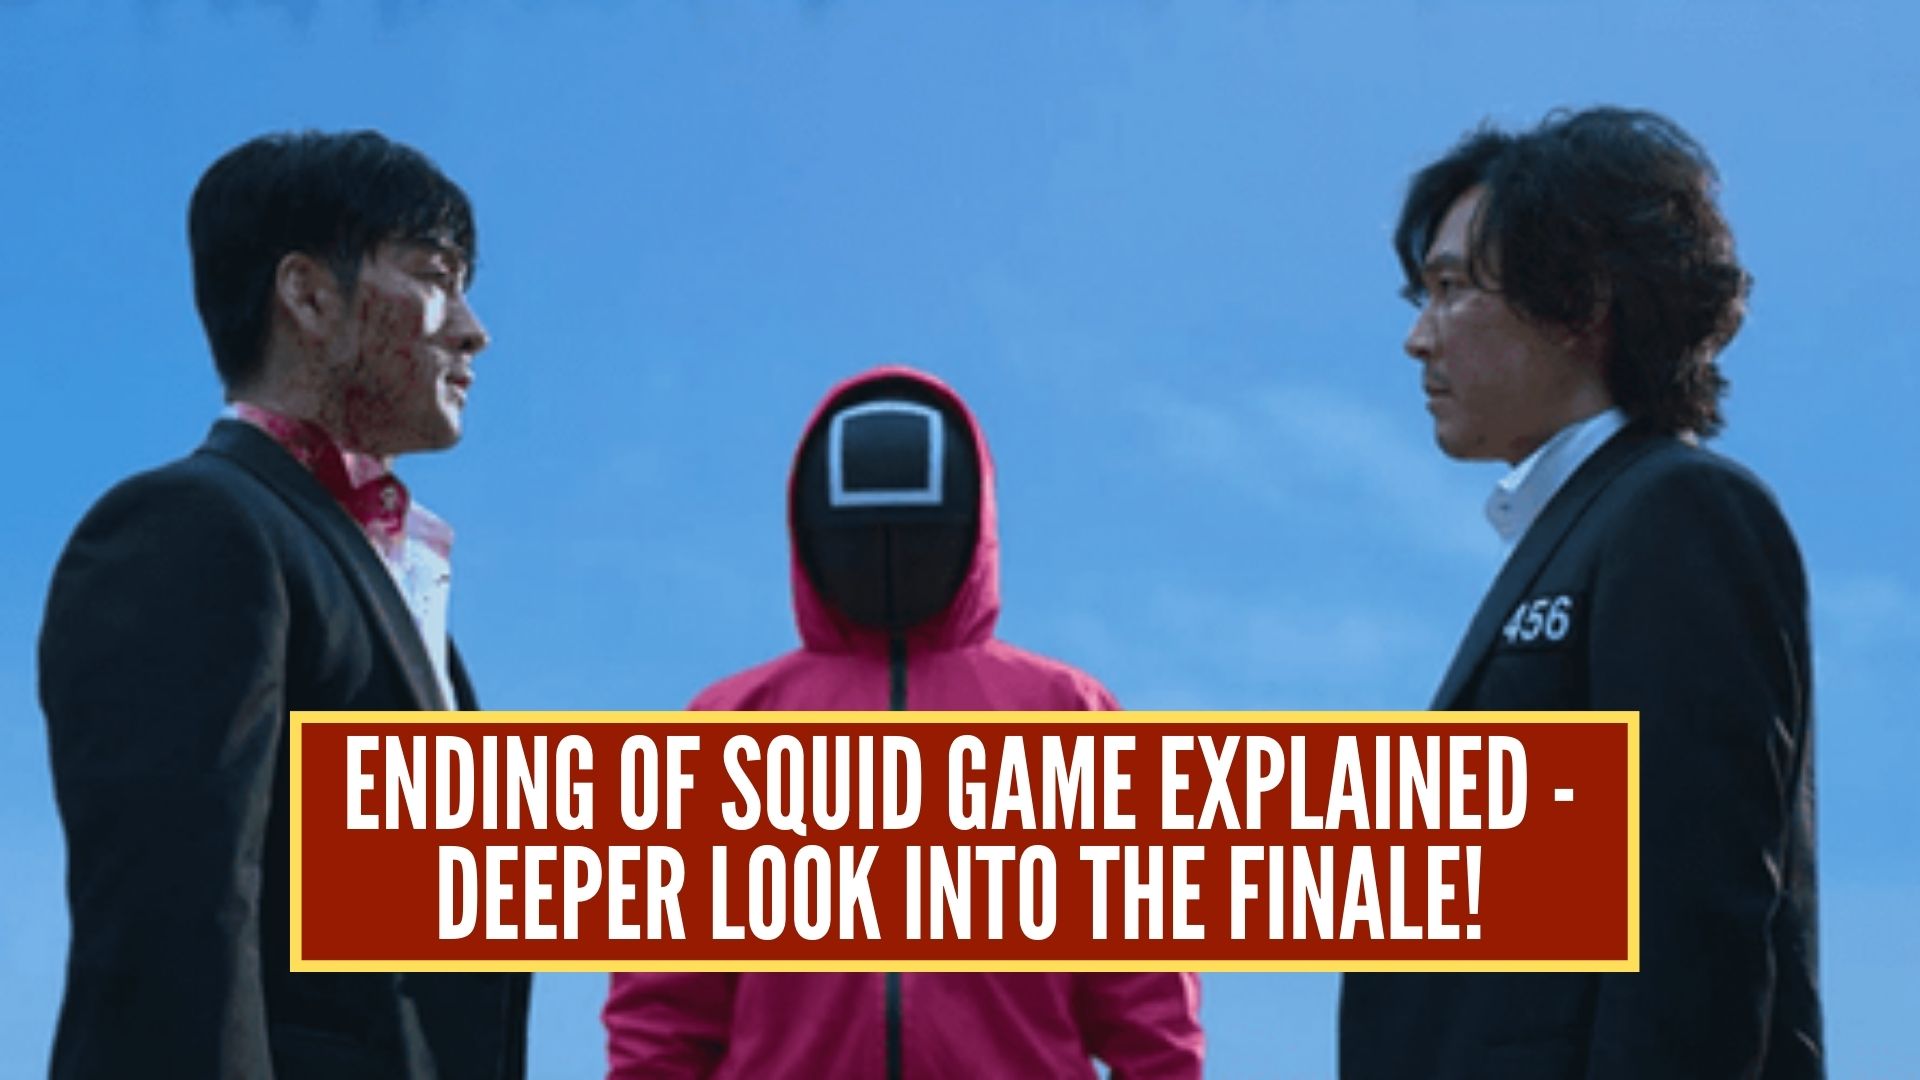 Ending of Squid Game Explained